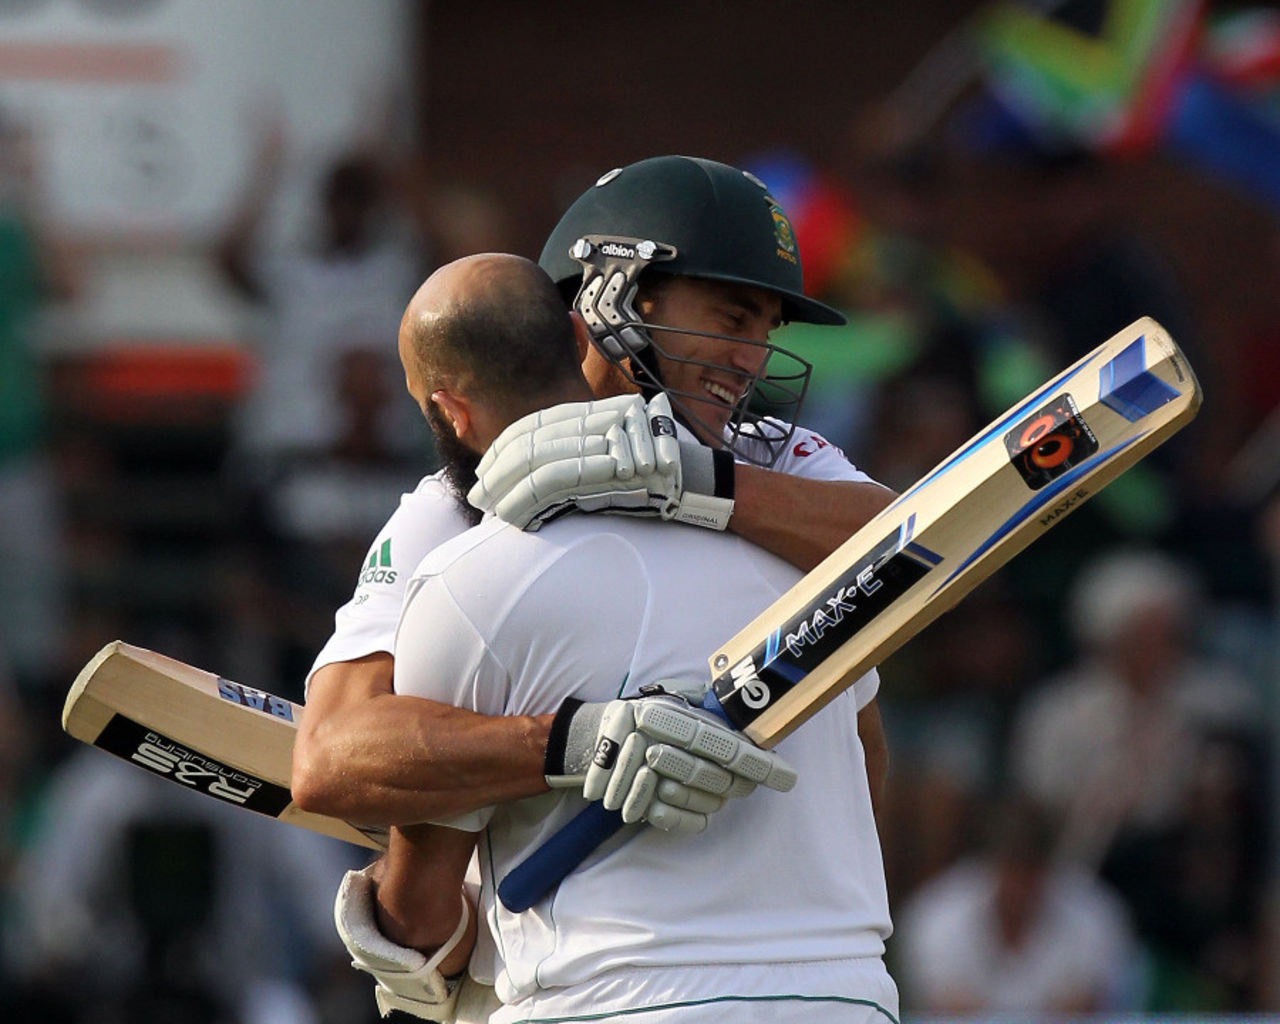 Hashim Amla embraces Faf du Plessis after reaching his century, South Africa v New Zealand, 2nd Test, Port Elizabeth, 1st day, January 11, 2013